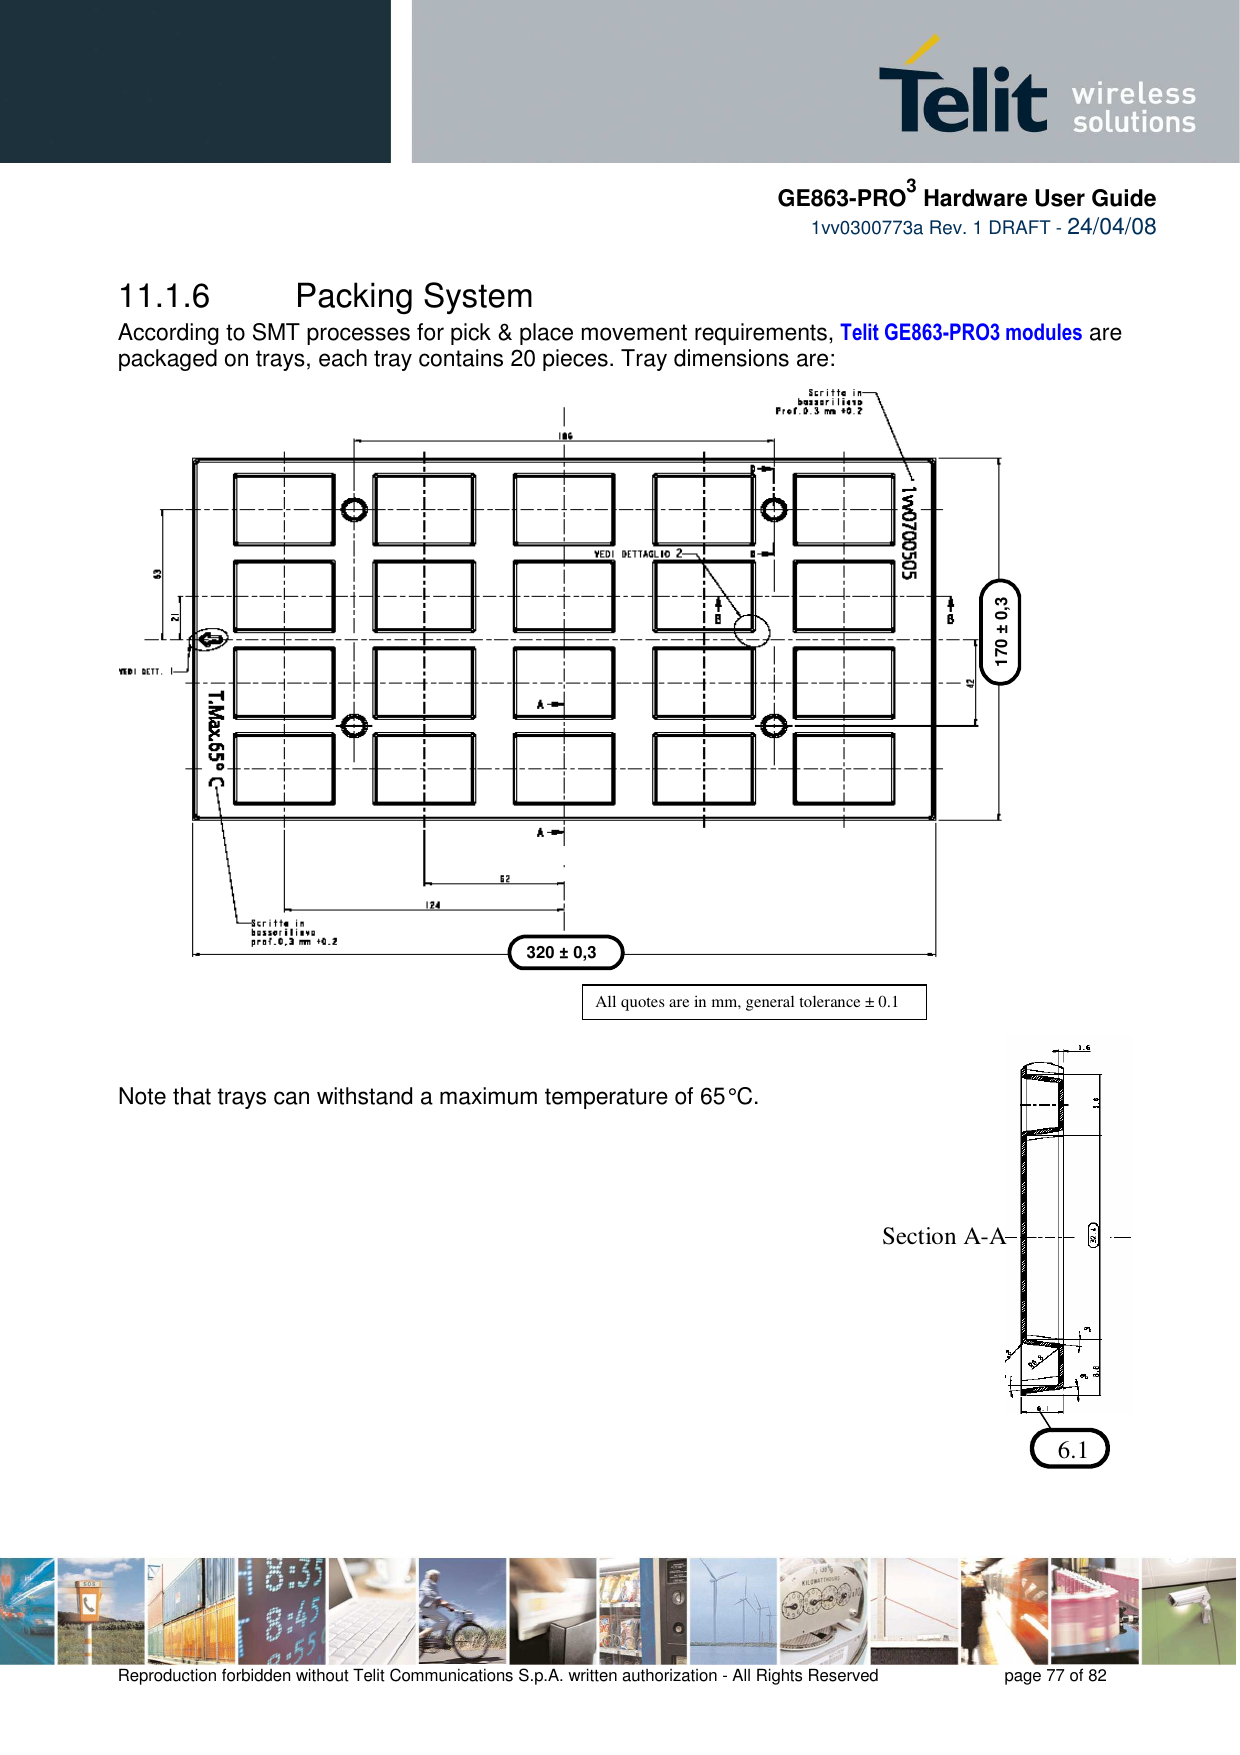     GE863-PRO3 Hardware User Guide  1vv0300773a Rev. 1 DRAFT - 24/04/08    Reproduction forbidden without Telit Communications S.p.A. written authorization - All Rights Reserved    page 77 of 82  11.1.6  Packing System  According to SMT processes for pick &amp; place movement requirements, Telit GE863-PRO3 modules are packaged on trays, each tray contains 20 pieces. Tray dimensions are:                            Note that trays can withstand a maximum temperature of 65° C.                   320 ± 0,3 170 ± 0,3 All quotes are in mm, general tolerance ± 0.1  6.1  Section A-A 